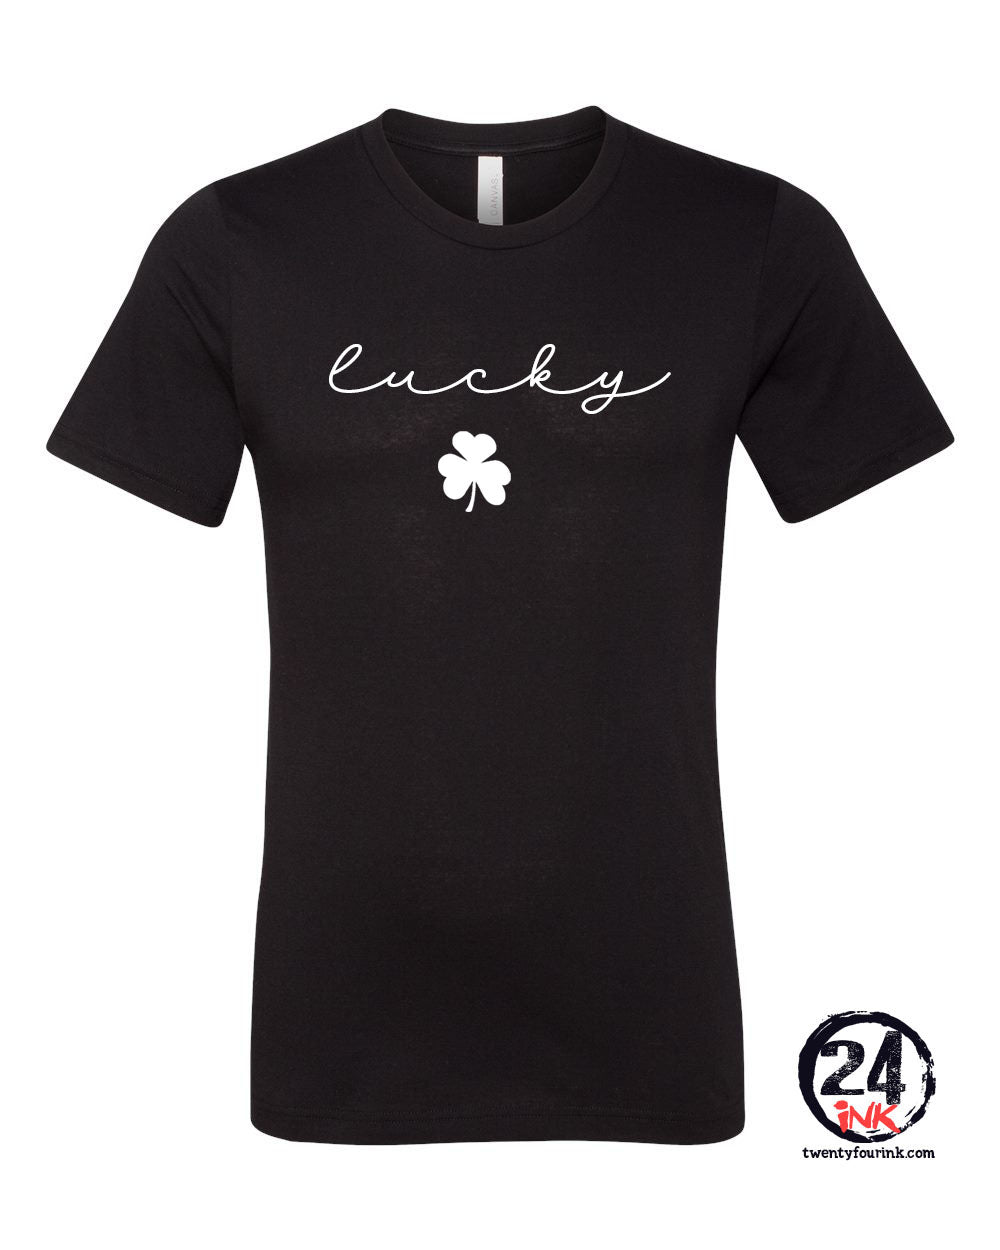 Lucky St. Patrick's Day T-Shirt